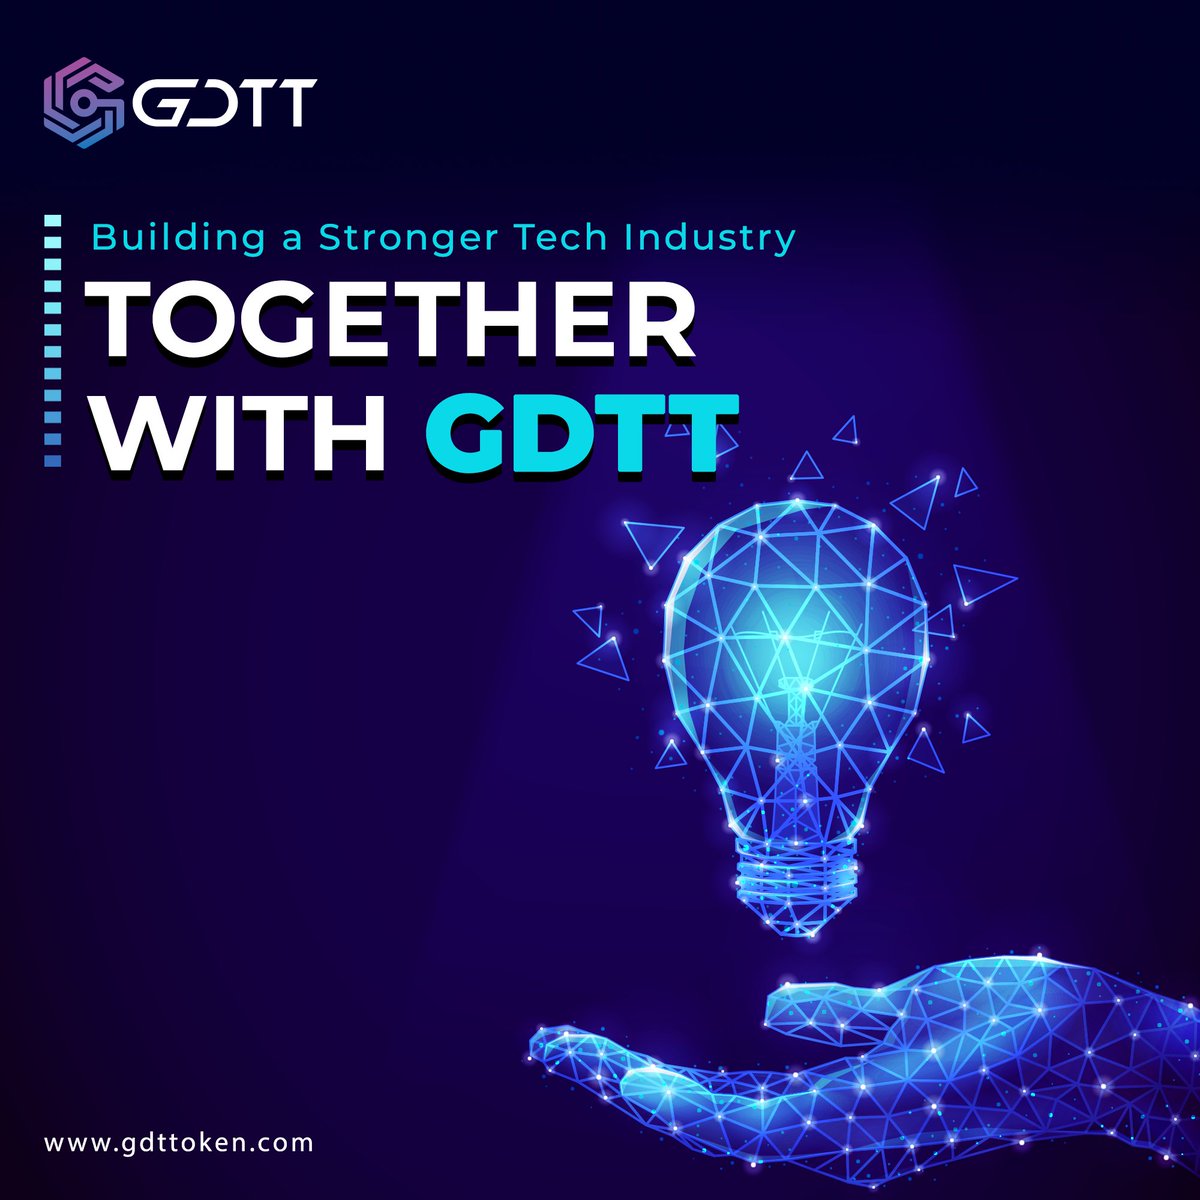 Join the digital revolution with #GDTTProject! Explore the exciting ecosystem that empowers technology projects. For More Info :
 gdttoken.com 
#GlobalNetworking #TechCommunity #TechInnovation #BlockchainRevolution #GDTTHub #TechRevolution